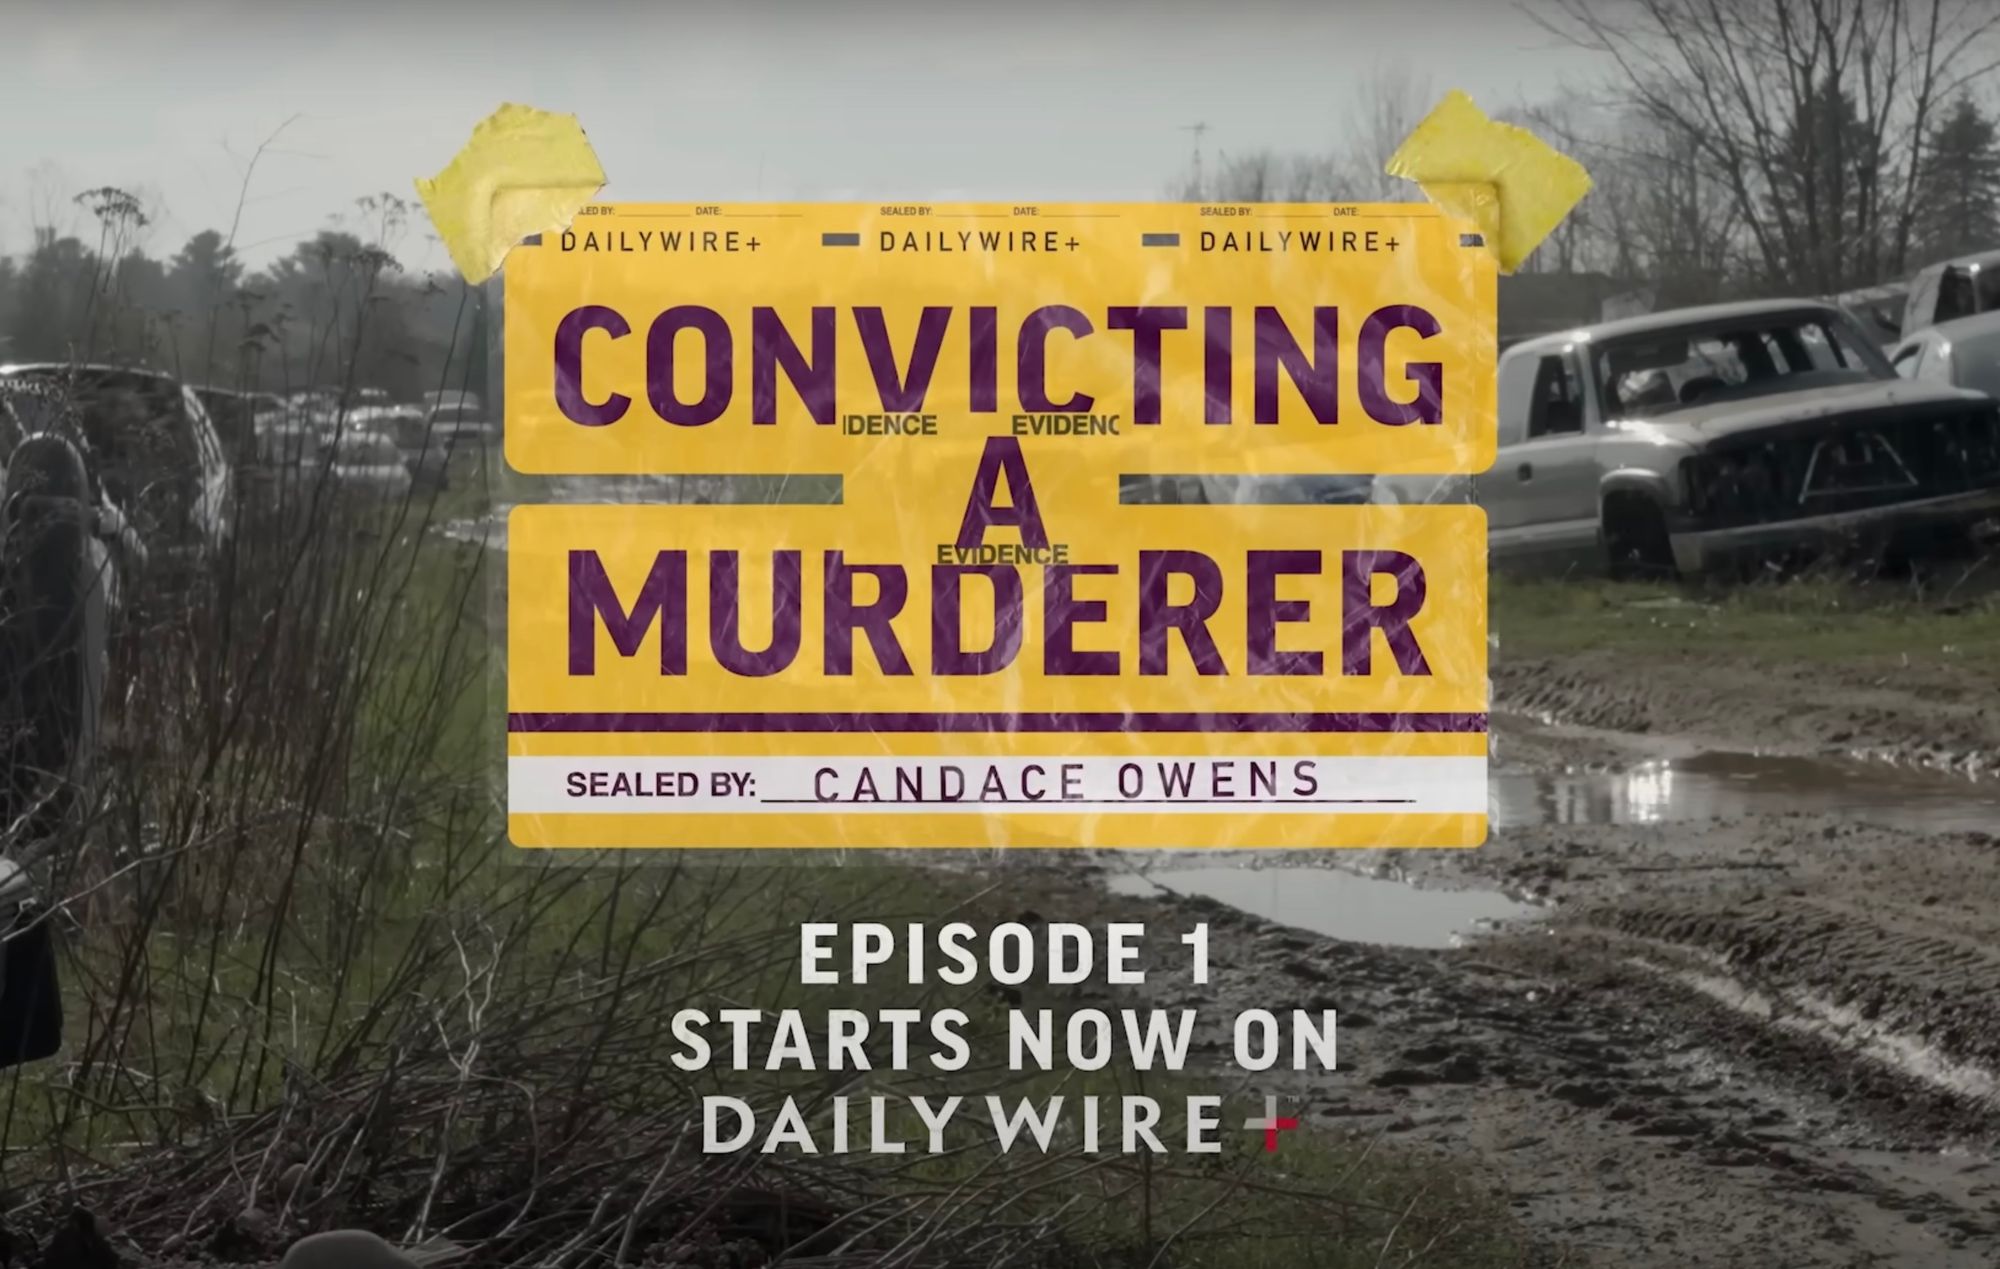 Many Question If DailyWire+ "Convicting A Murderer" Adds To The Conversation On Steven Avery's Guilt